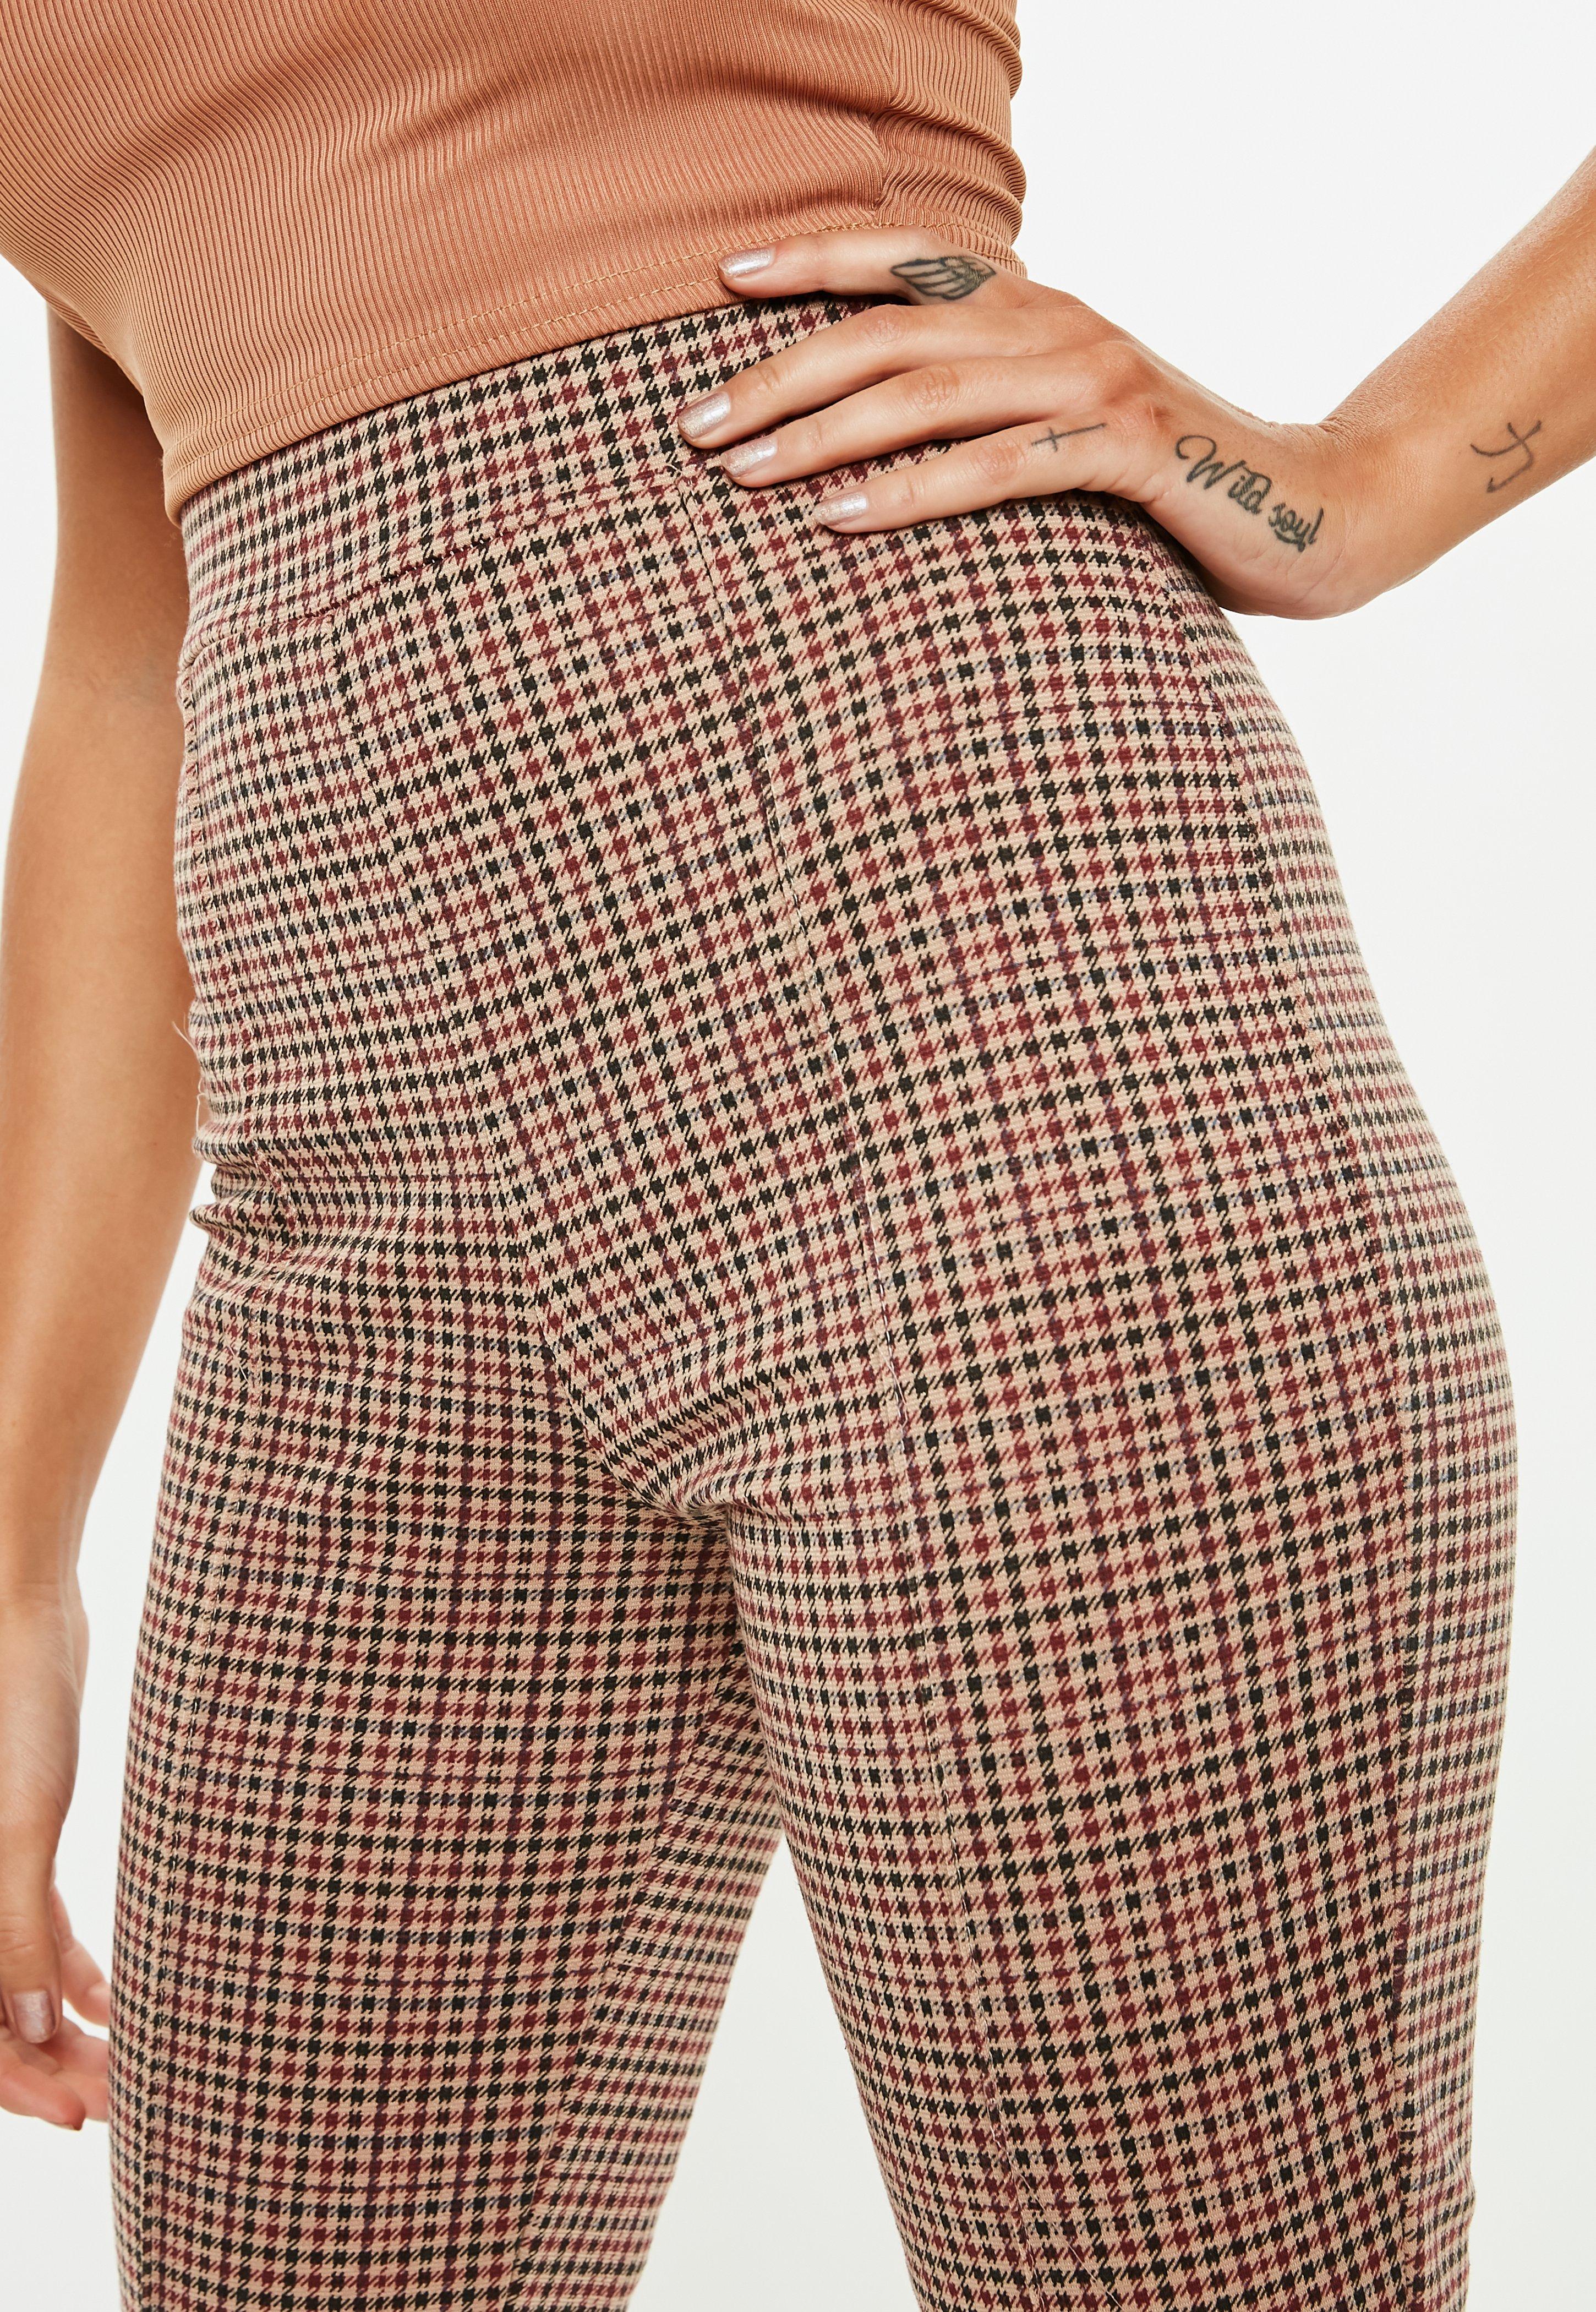 Lyst - Missguided Brown Heritage Plaid Cigarette Pants in Brown